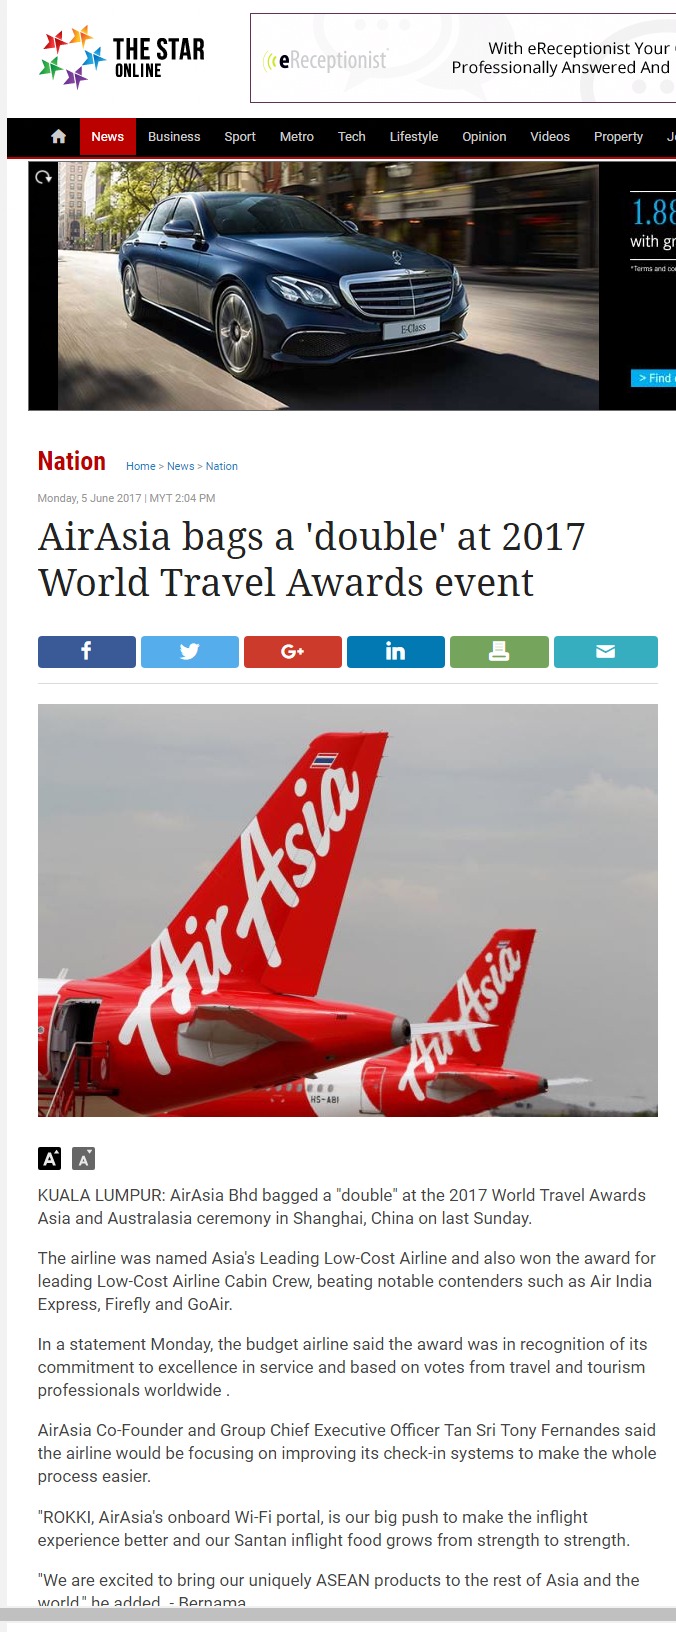 AirAsia bags a double at 2017 World Travel Awards